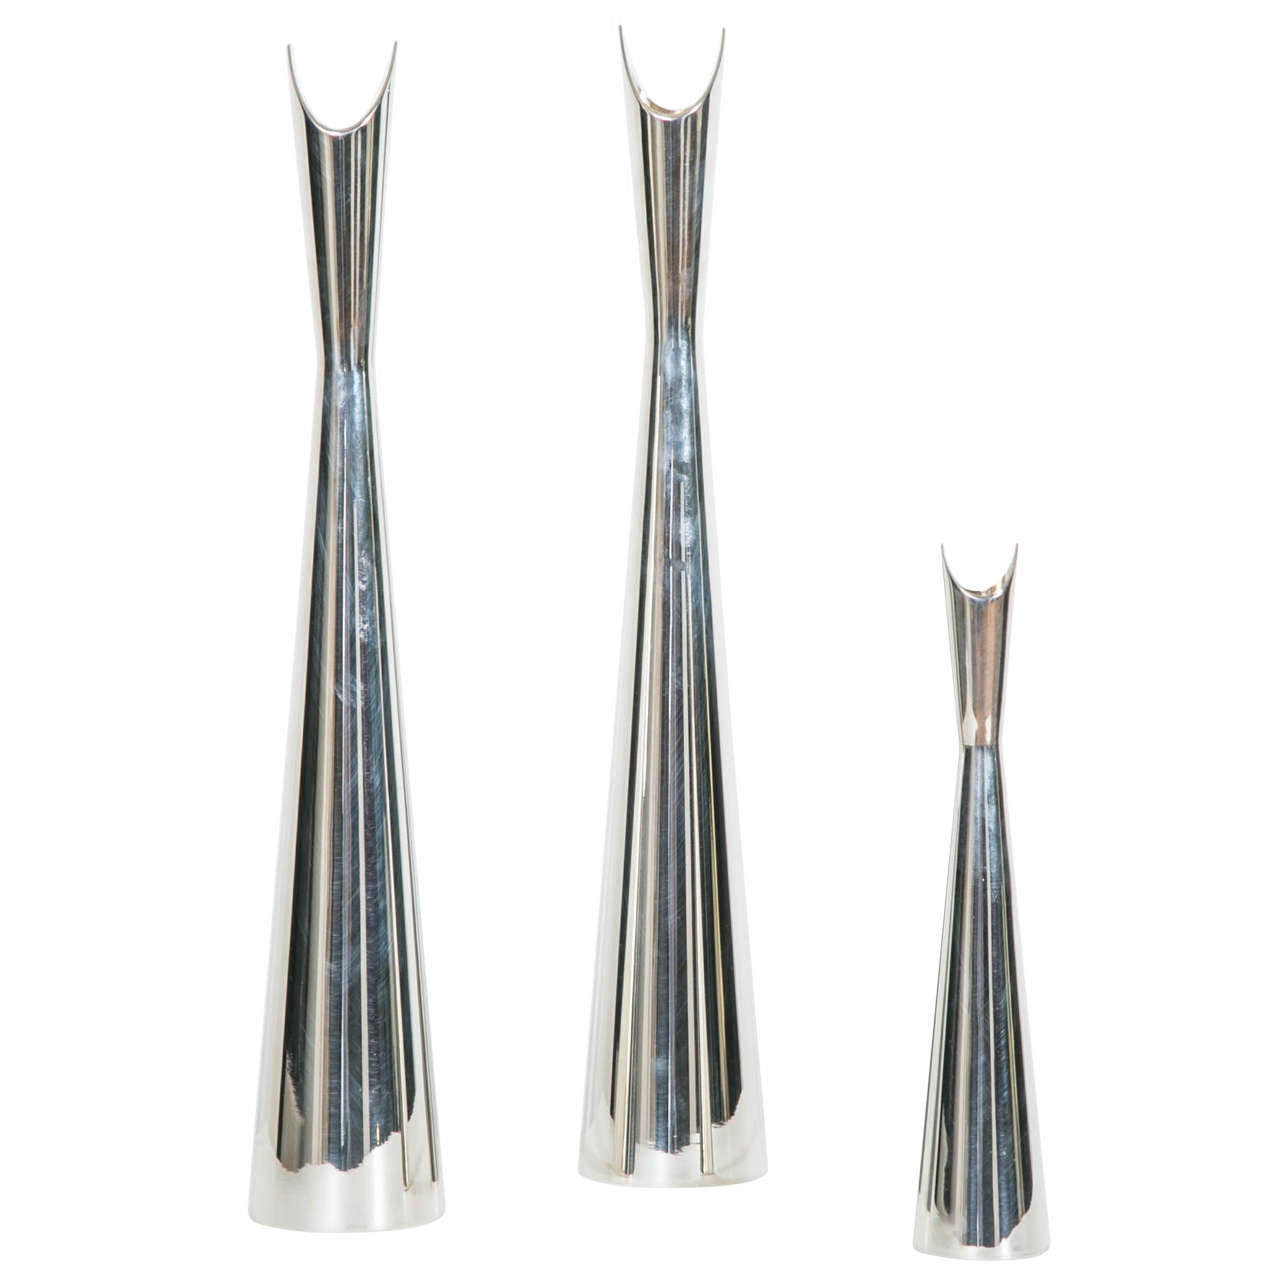 Three “Cardinal” Silvered Metal Vases by L. Sabattini for Christofle, 1970 For Sale